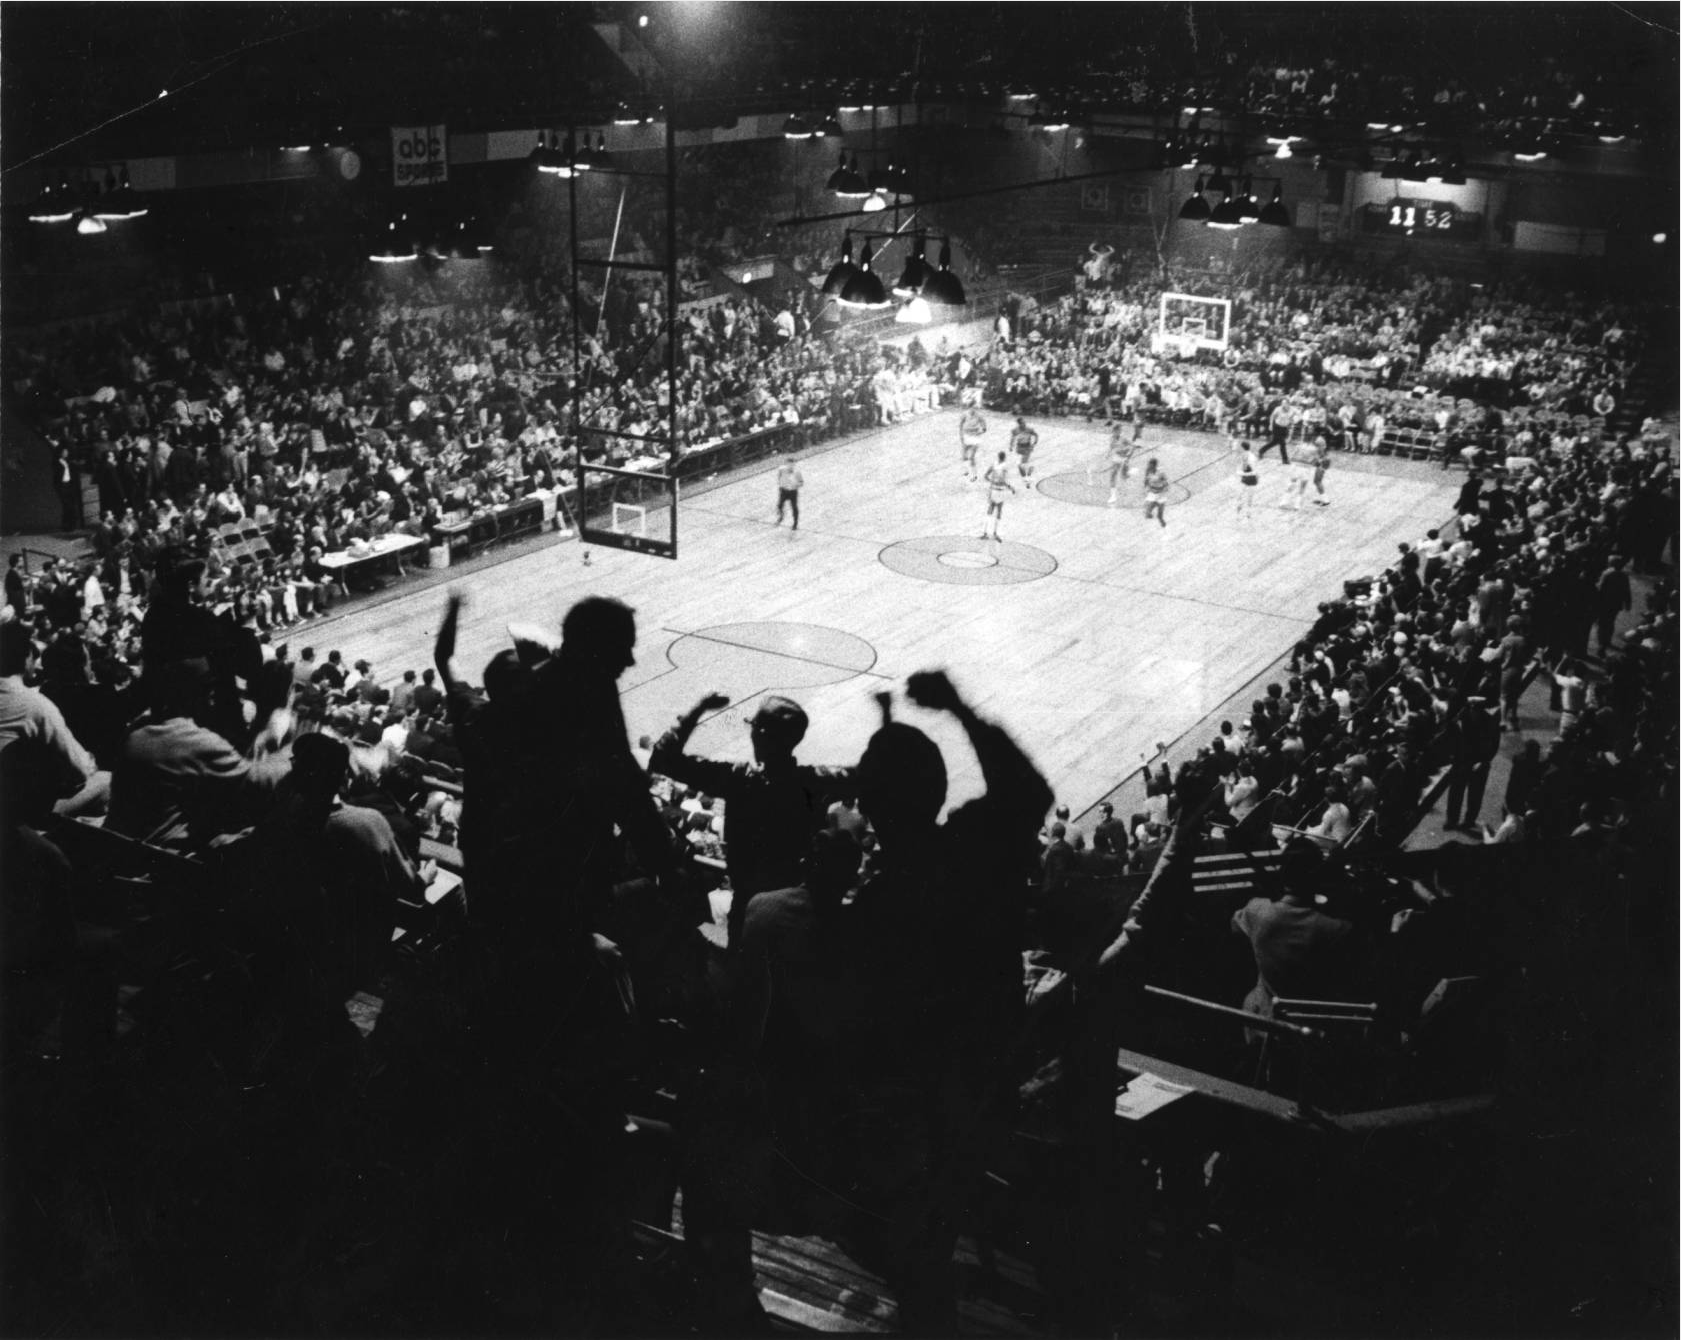 Excited spectators pack the stands of the Arena at a 1966 76ers and Celtics game.